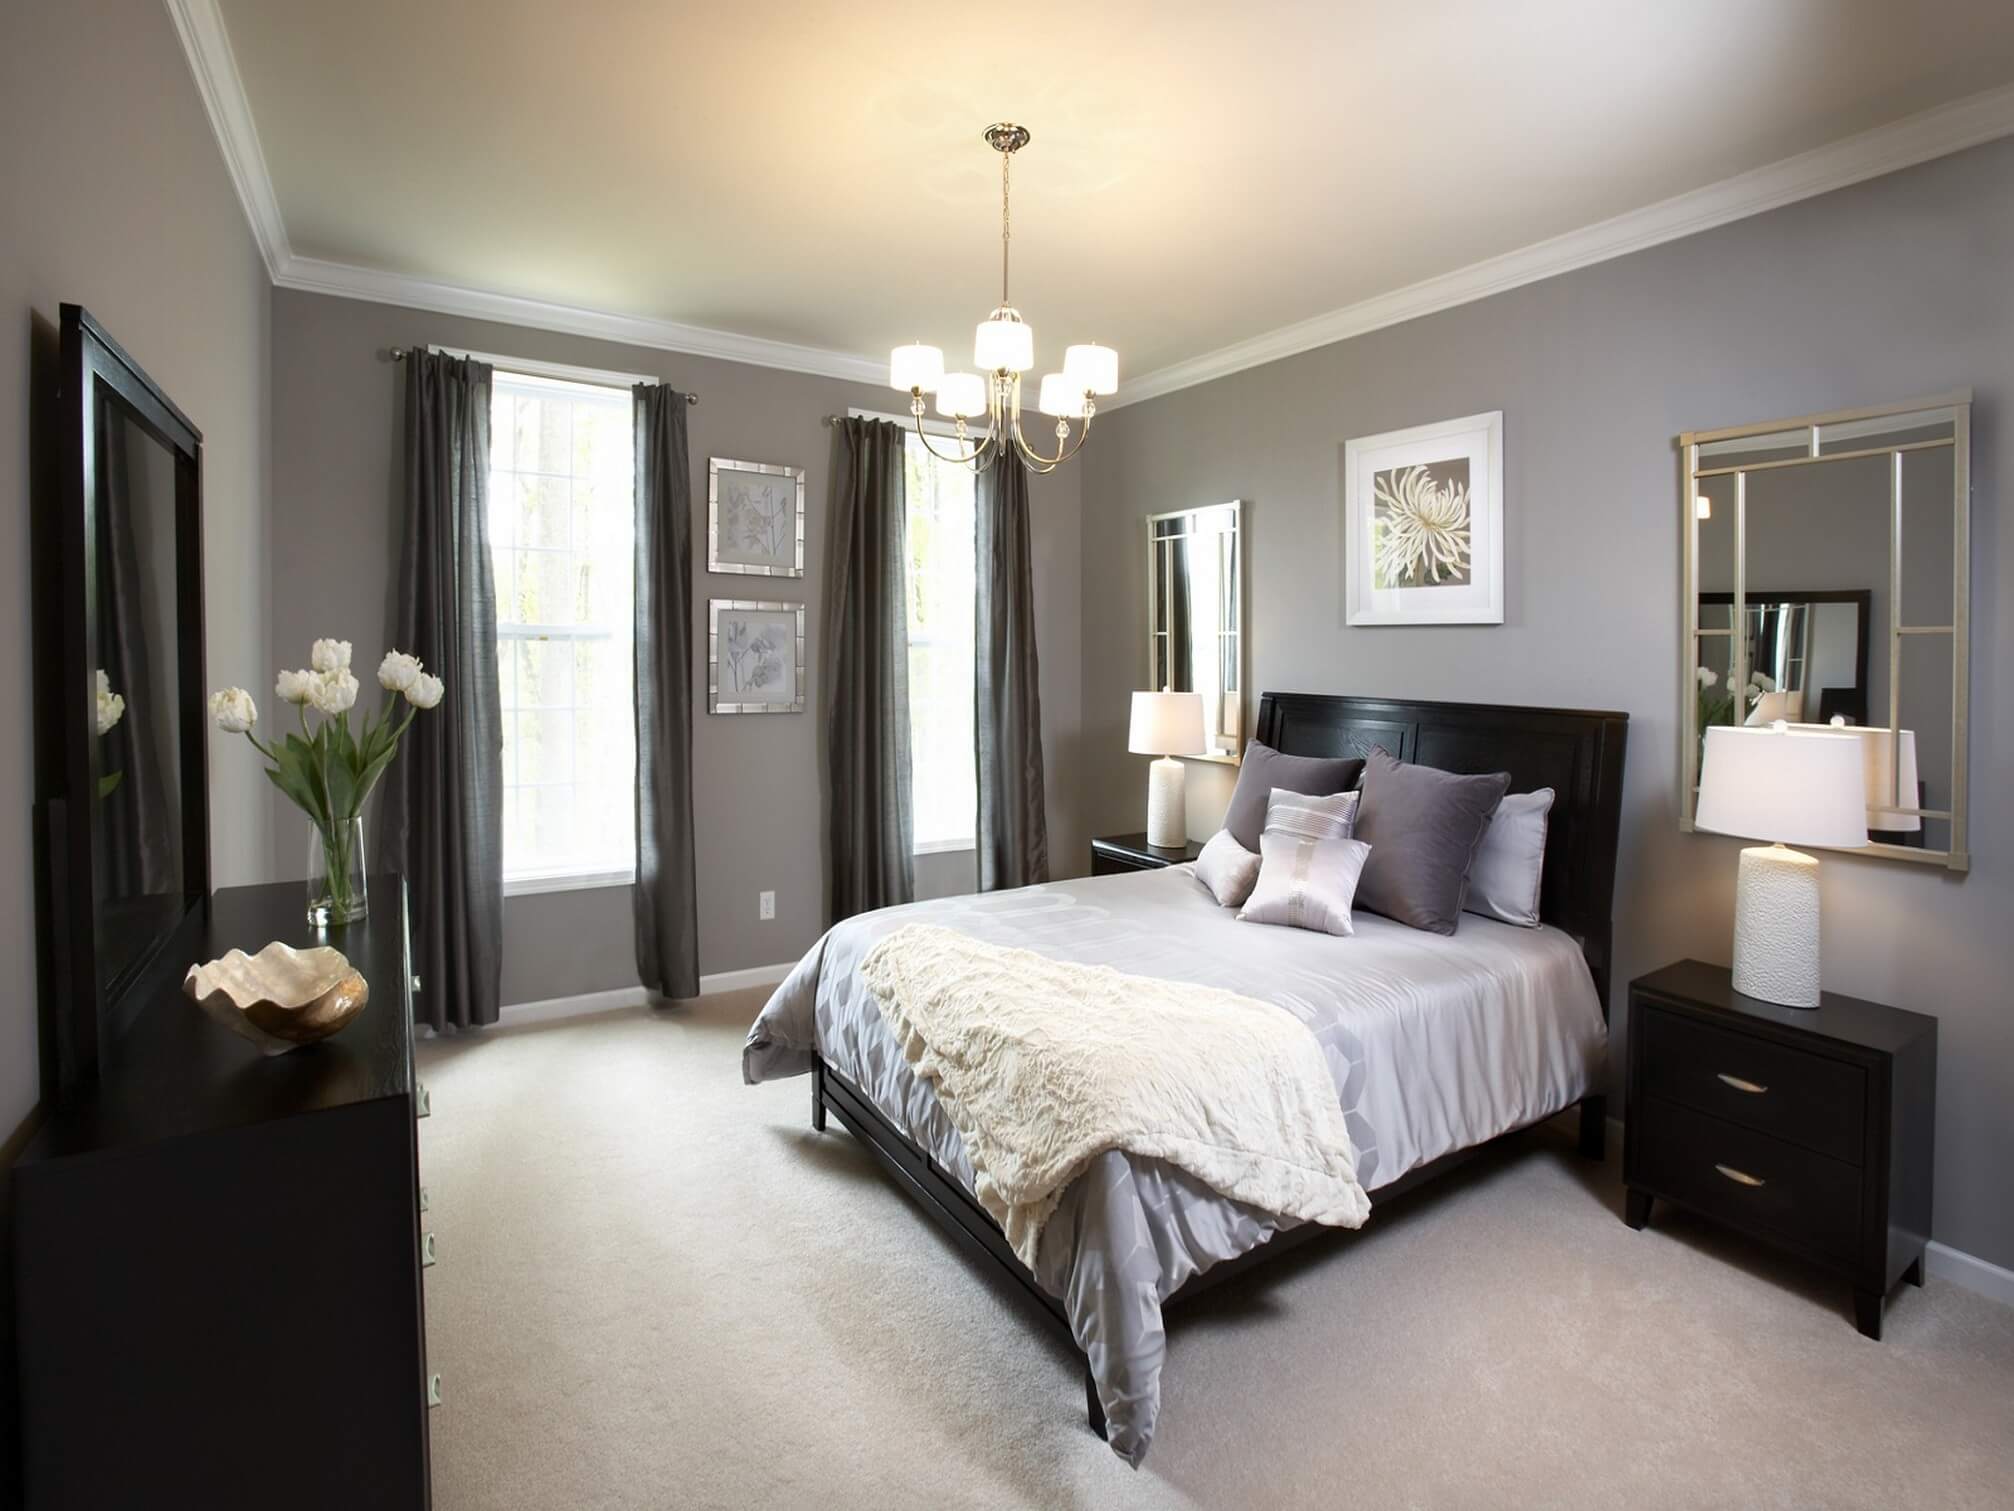 A Crisp and Classy Design Bedroom with Clean Black and Cool Shades of Grey